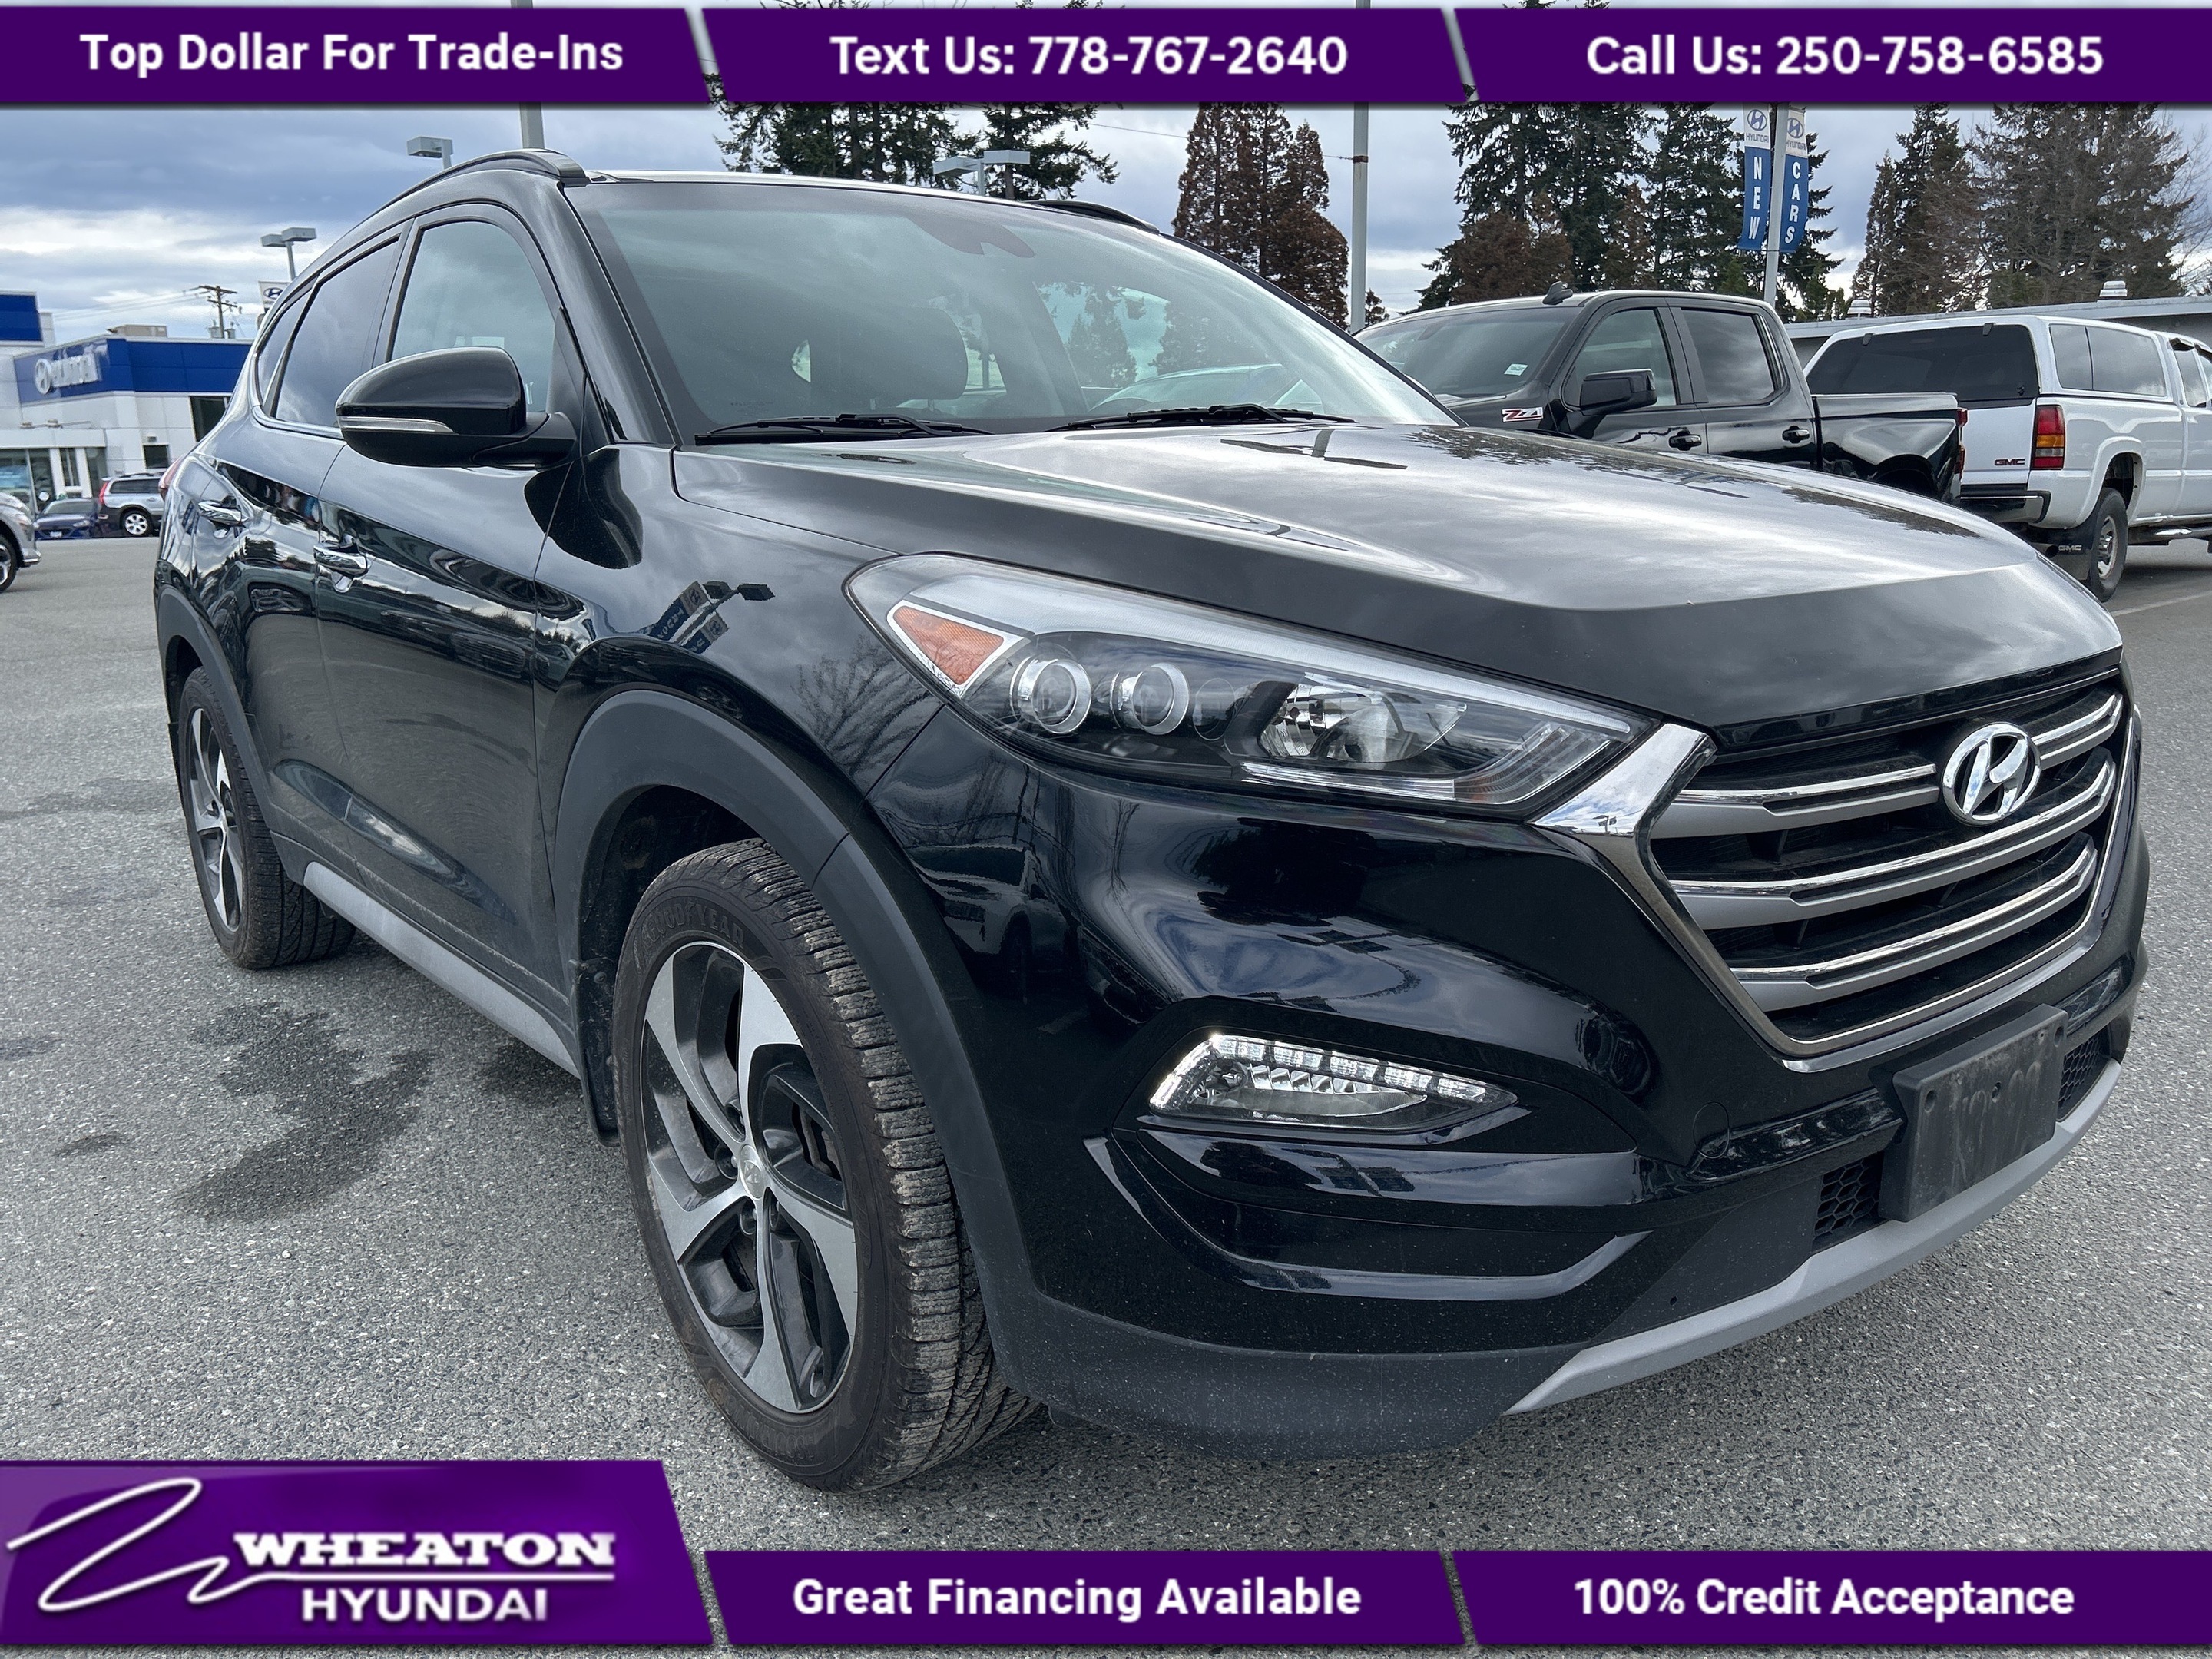 2018 Hyundai Tucson Ultimate, One Owner, No Accidents, Island Car, Tra